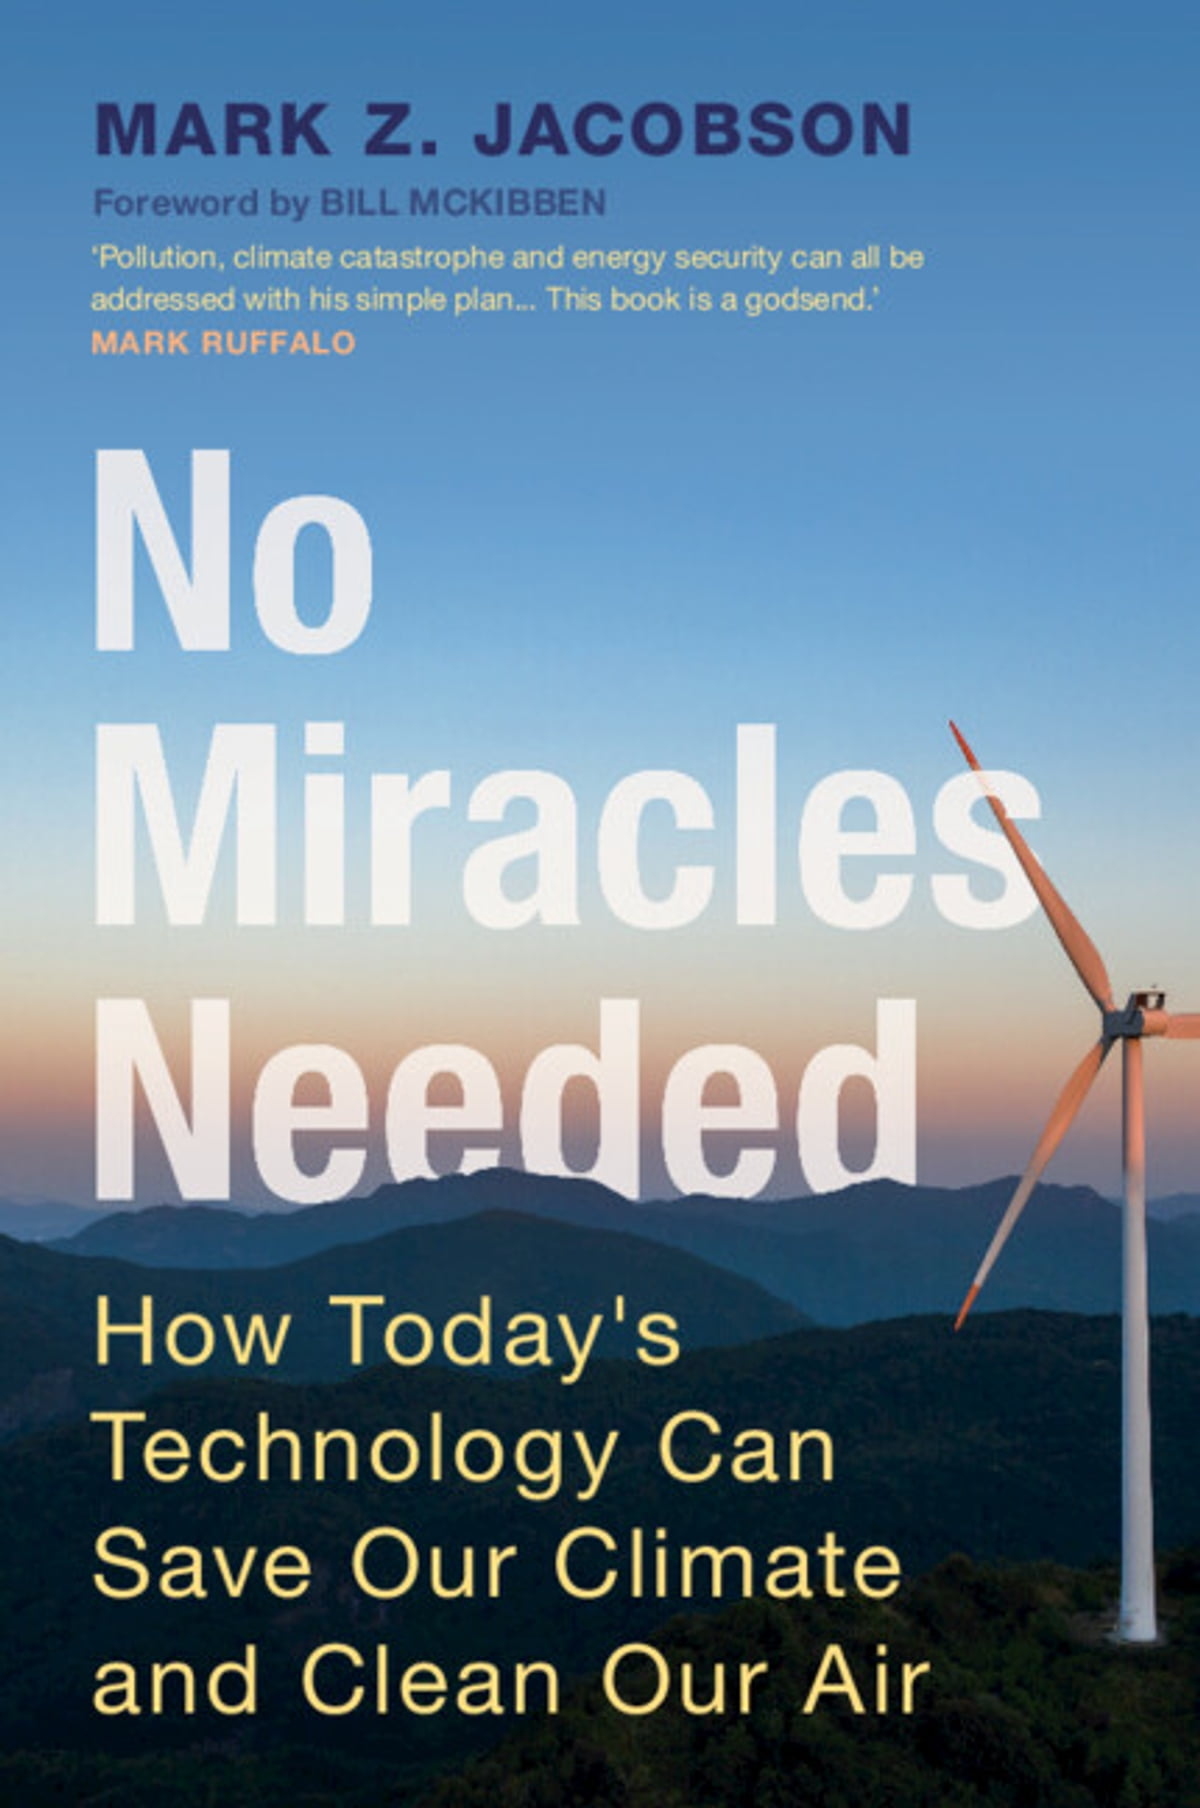 Cover of book "No miracles needed"